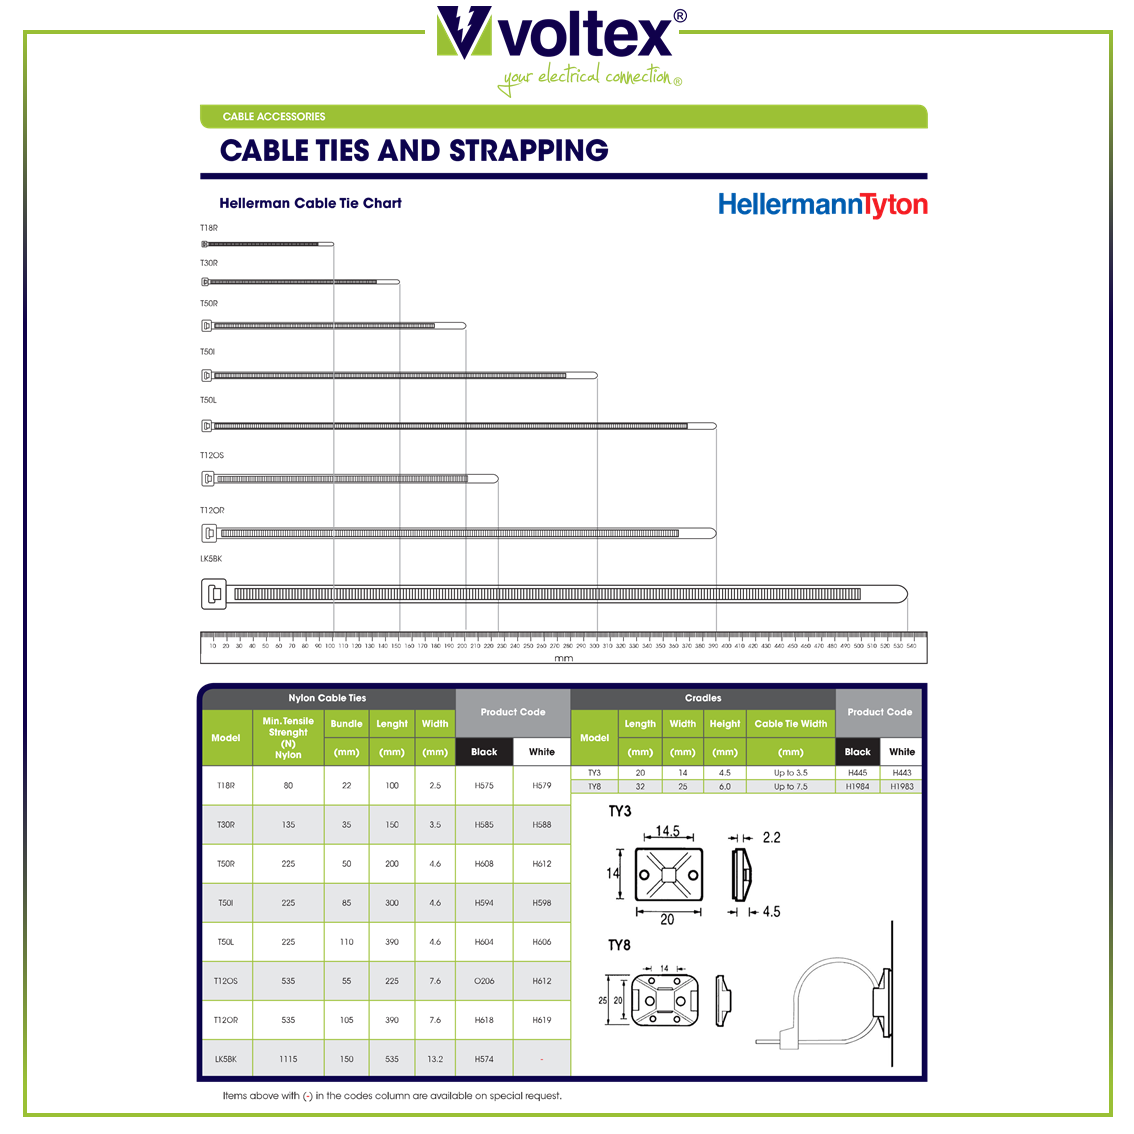 VOLTEX - Cable Ties and Strapping Catalogue